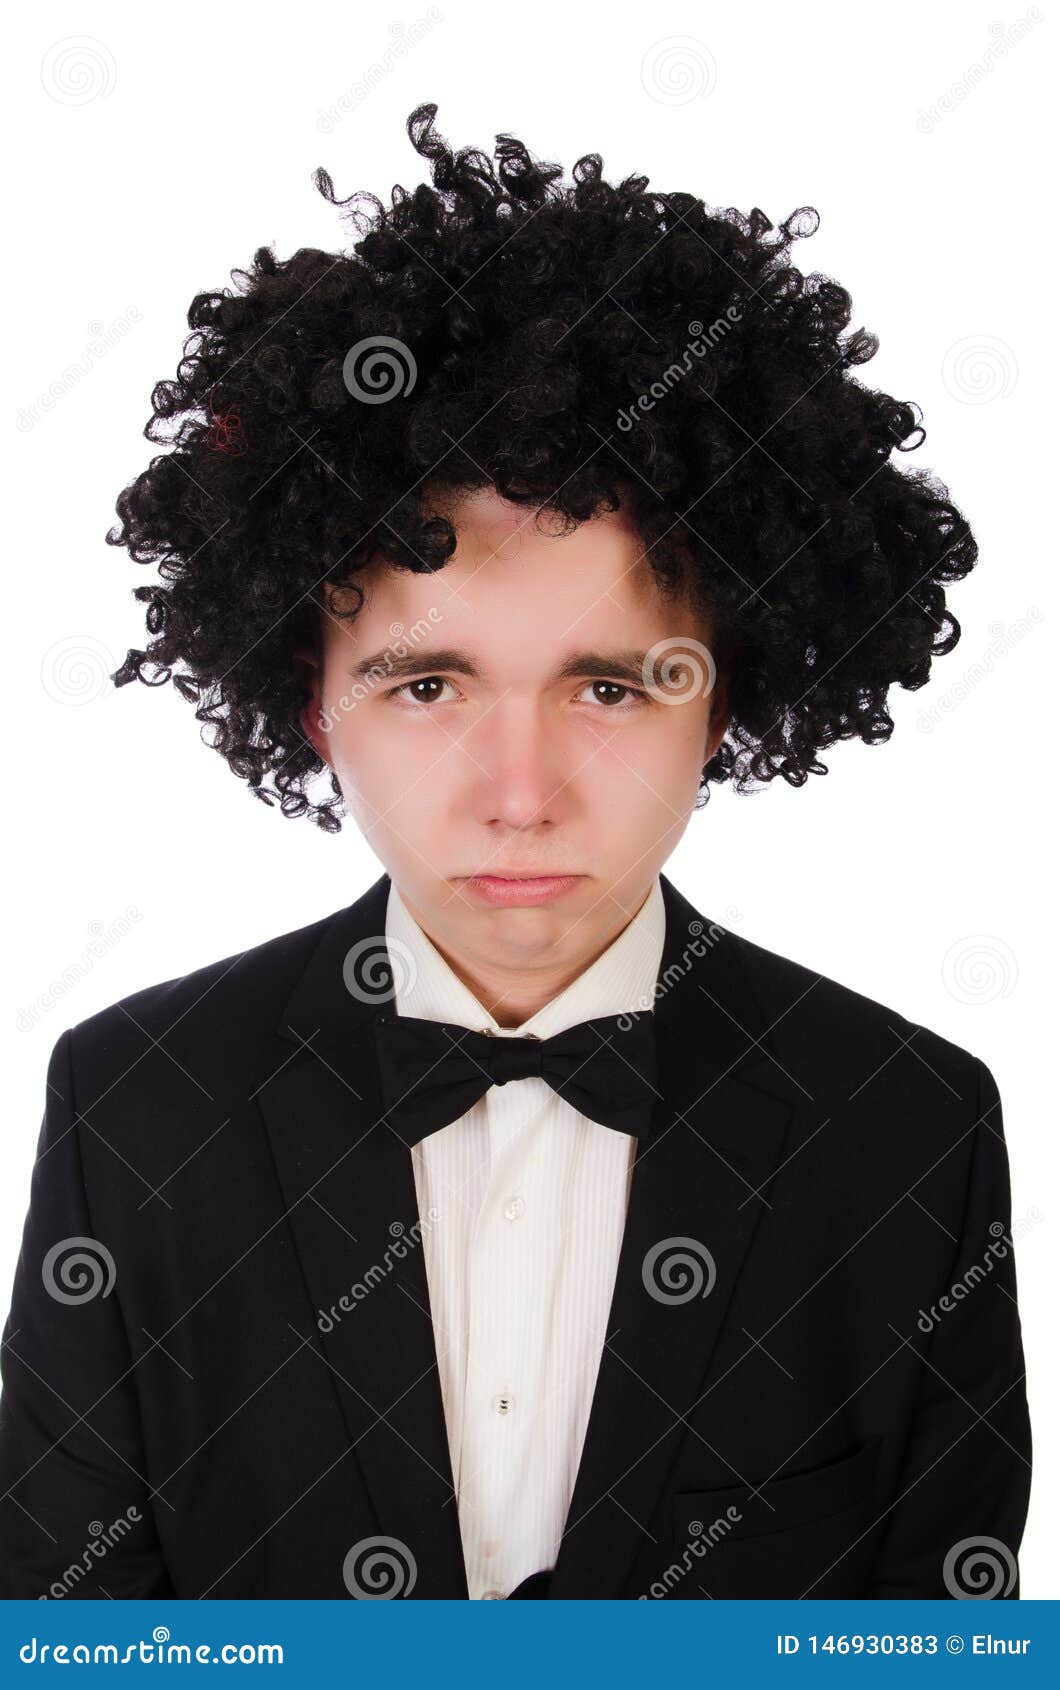 The Funny Man with Curly Hair Style Stock Image - Image of humorous,  distressed: 146930383